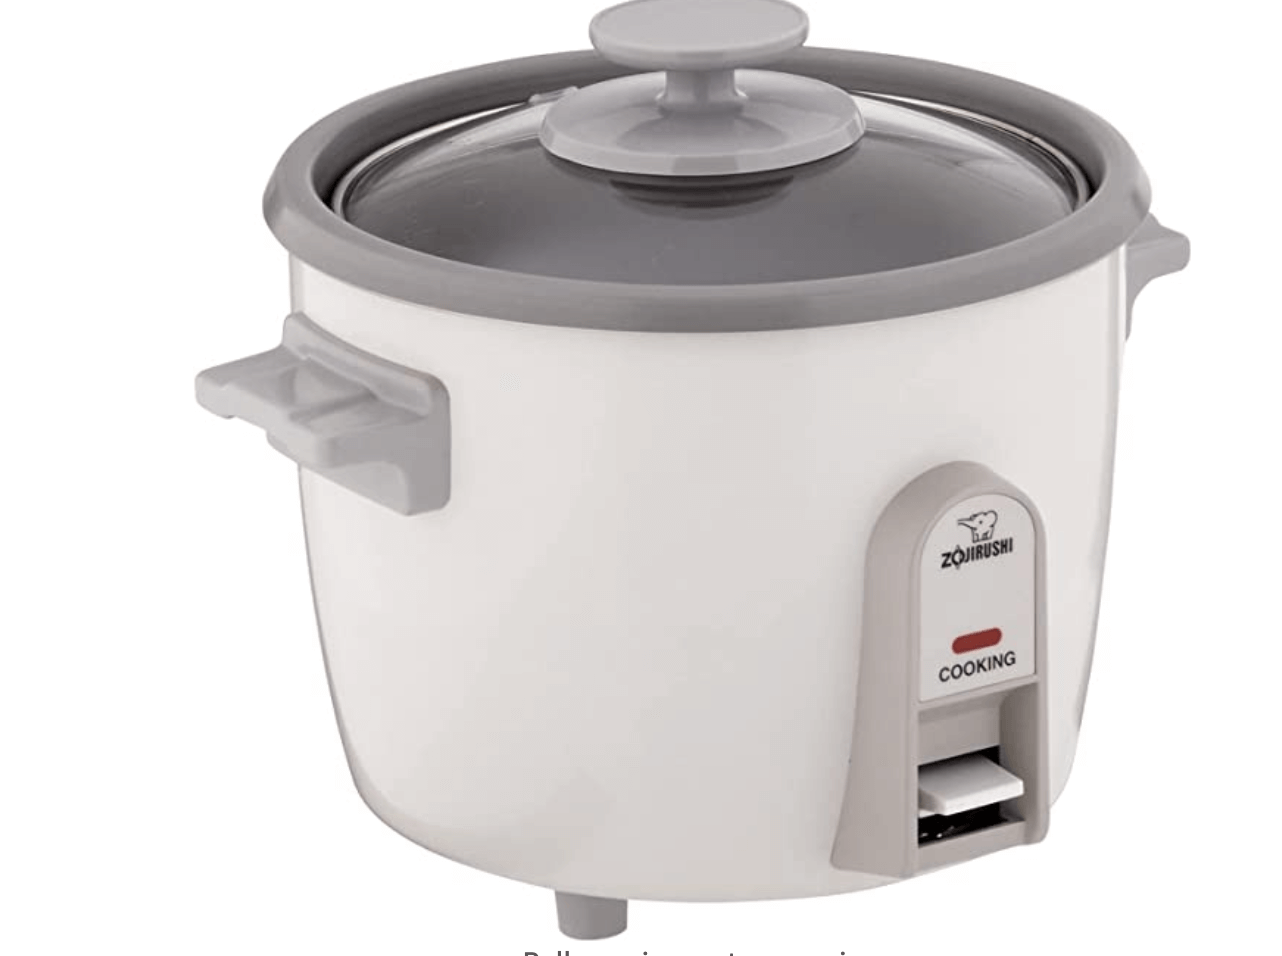 A small white rice cooker